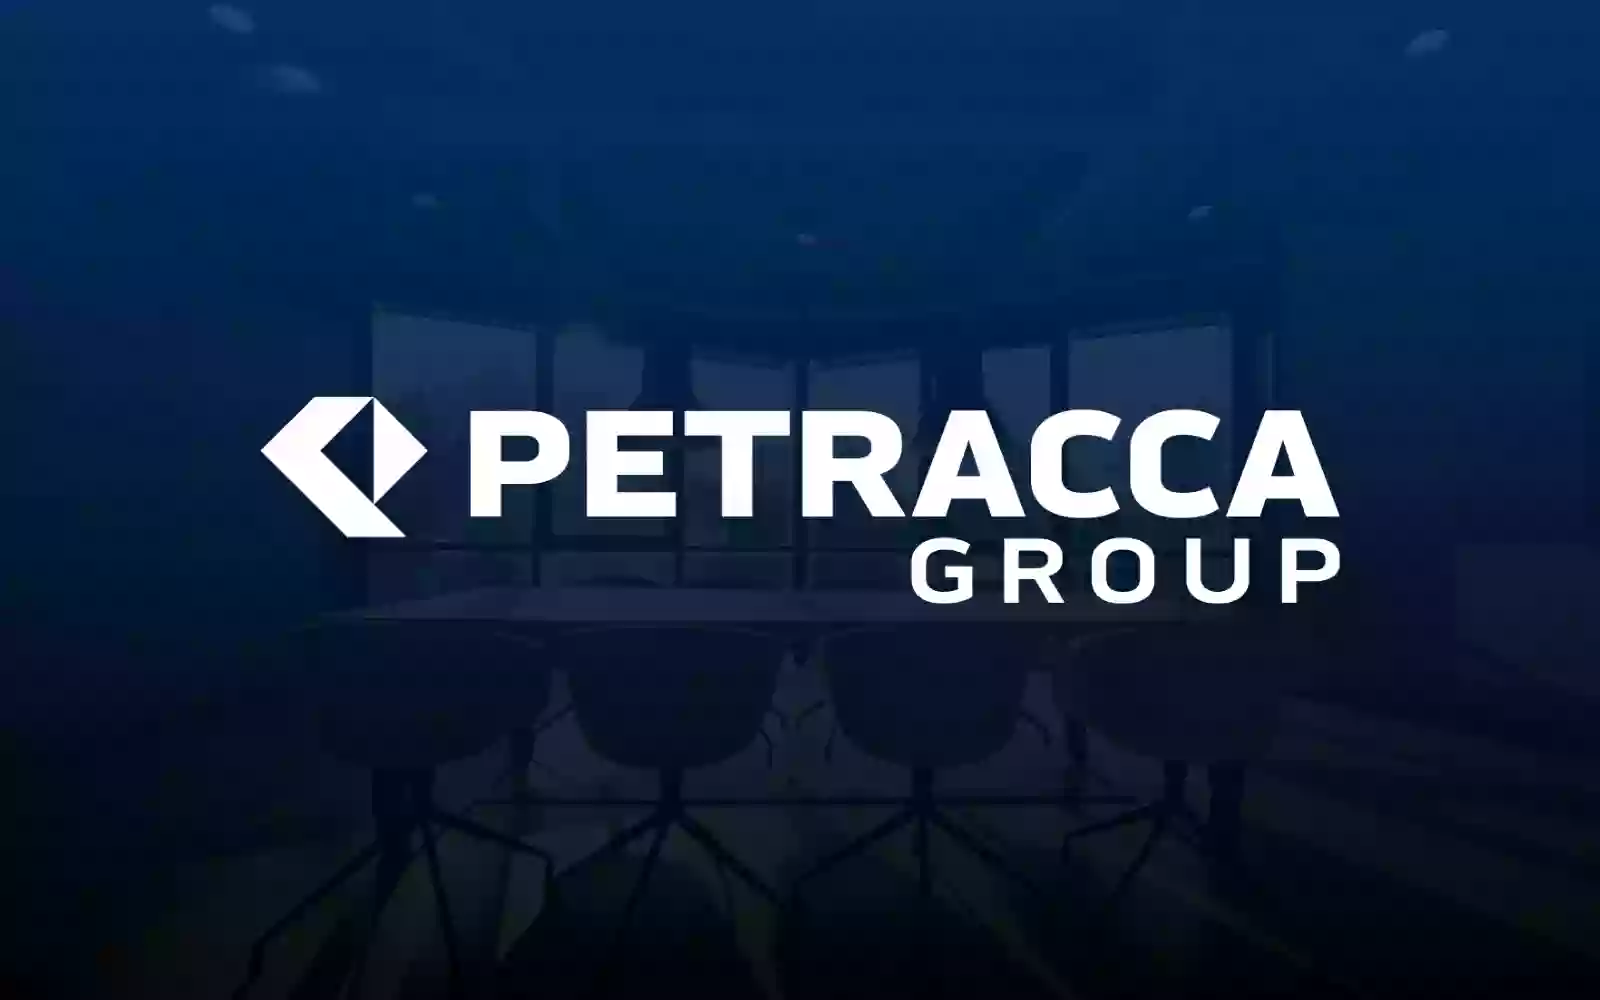 Petracca Group